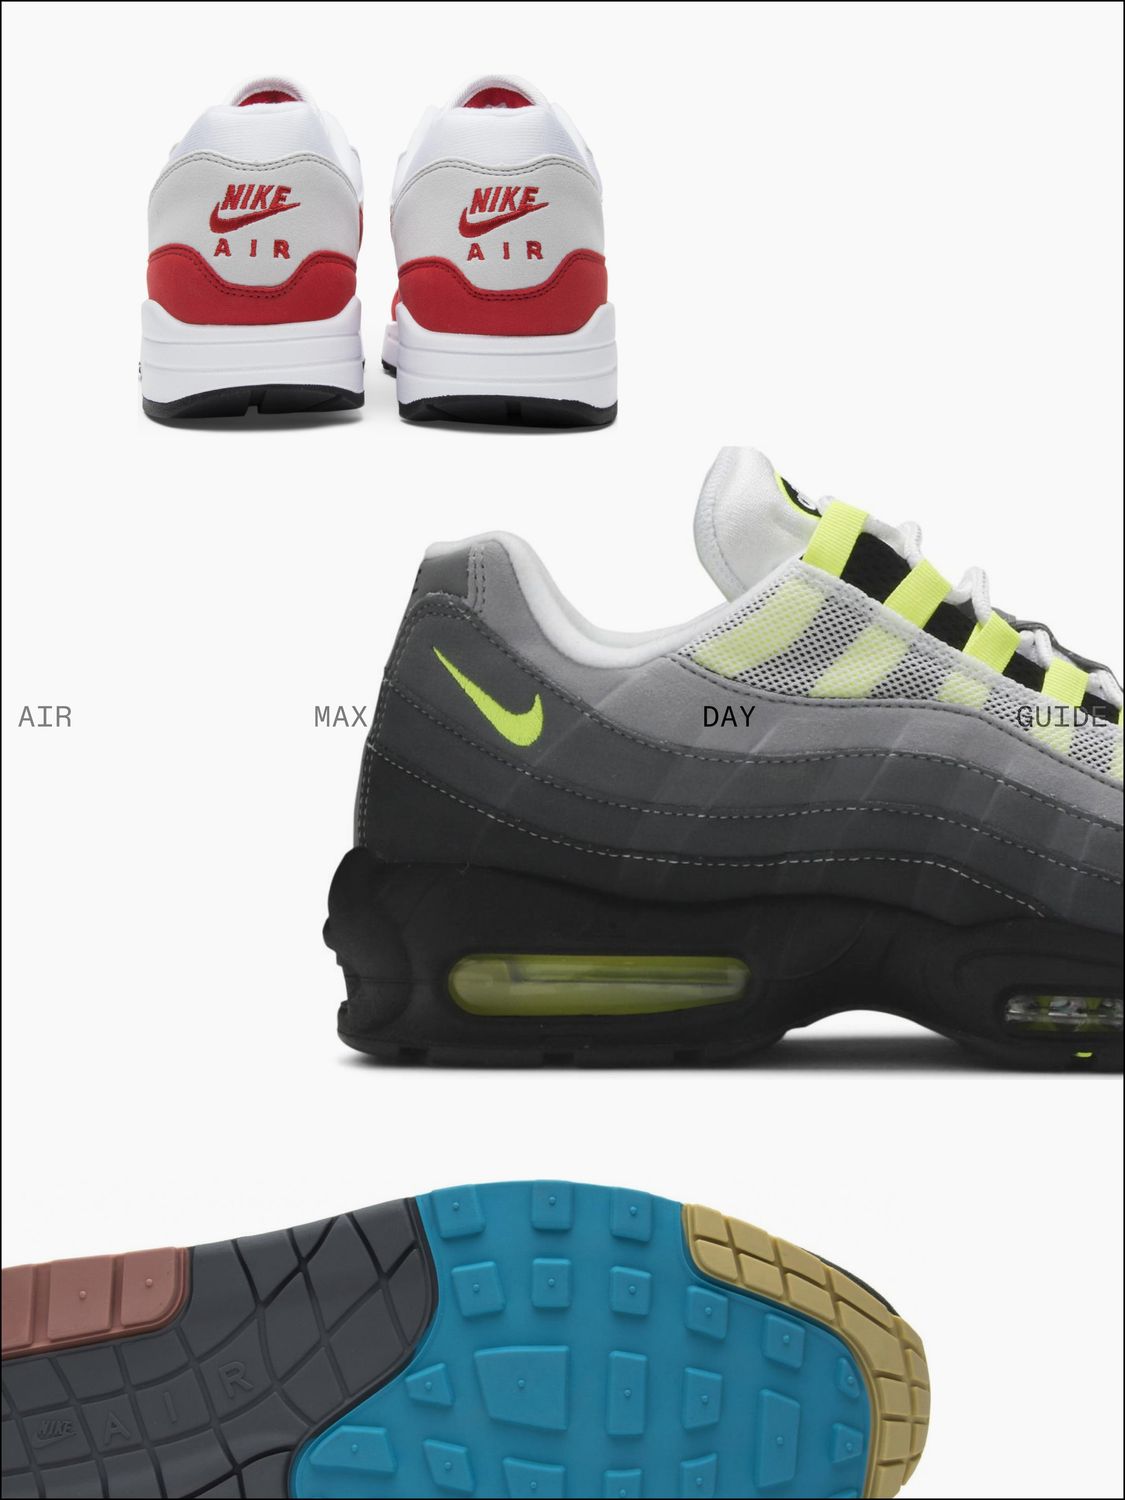 Air Max Day 2023: What You Need to Know About the Nike Event